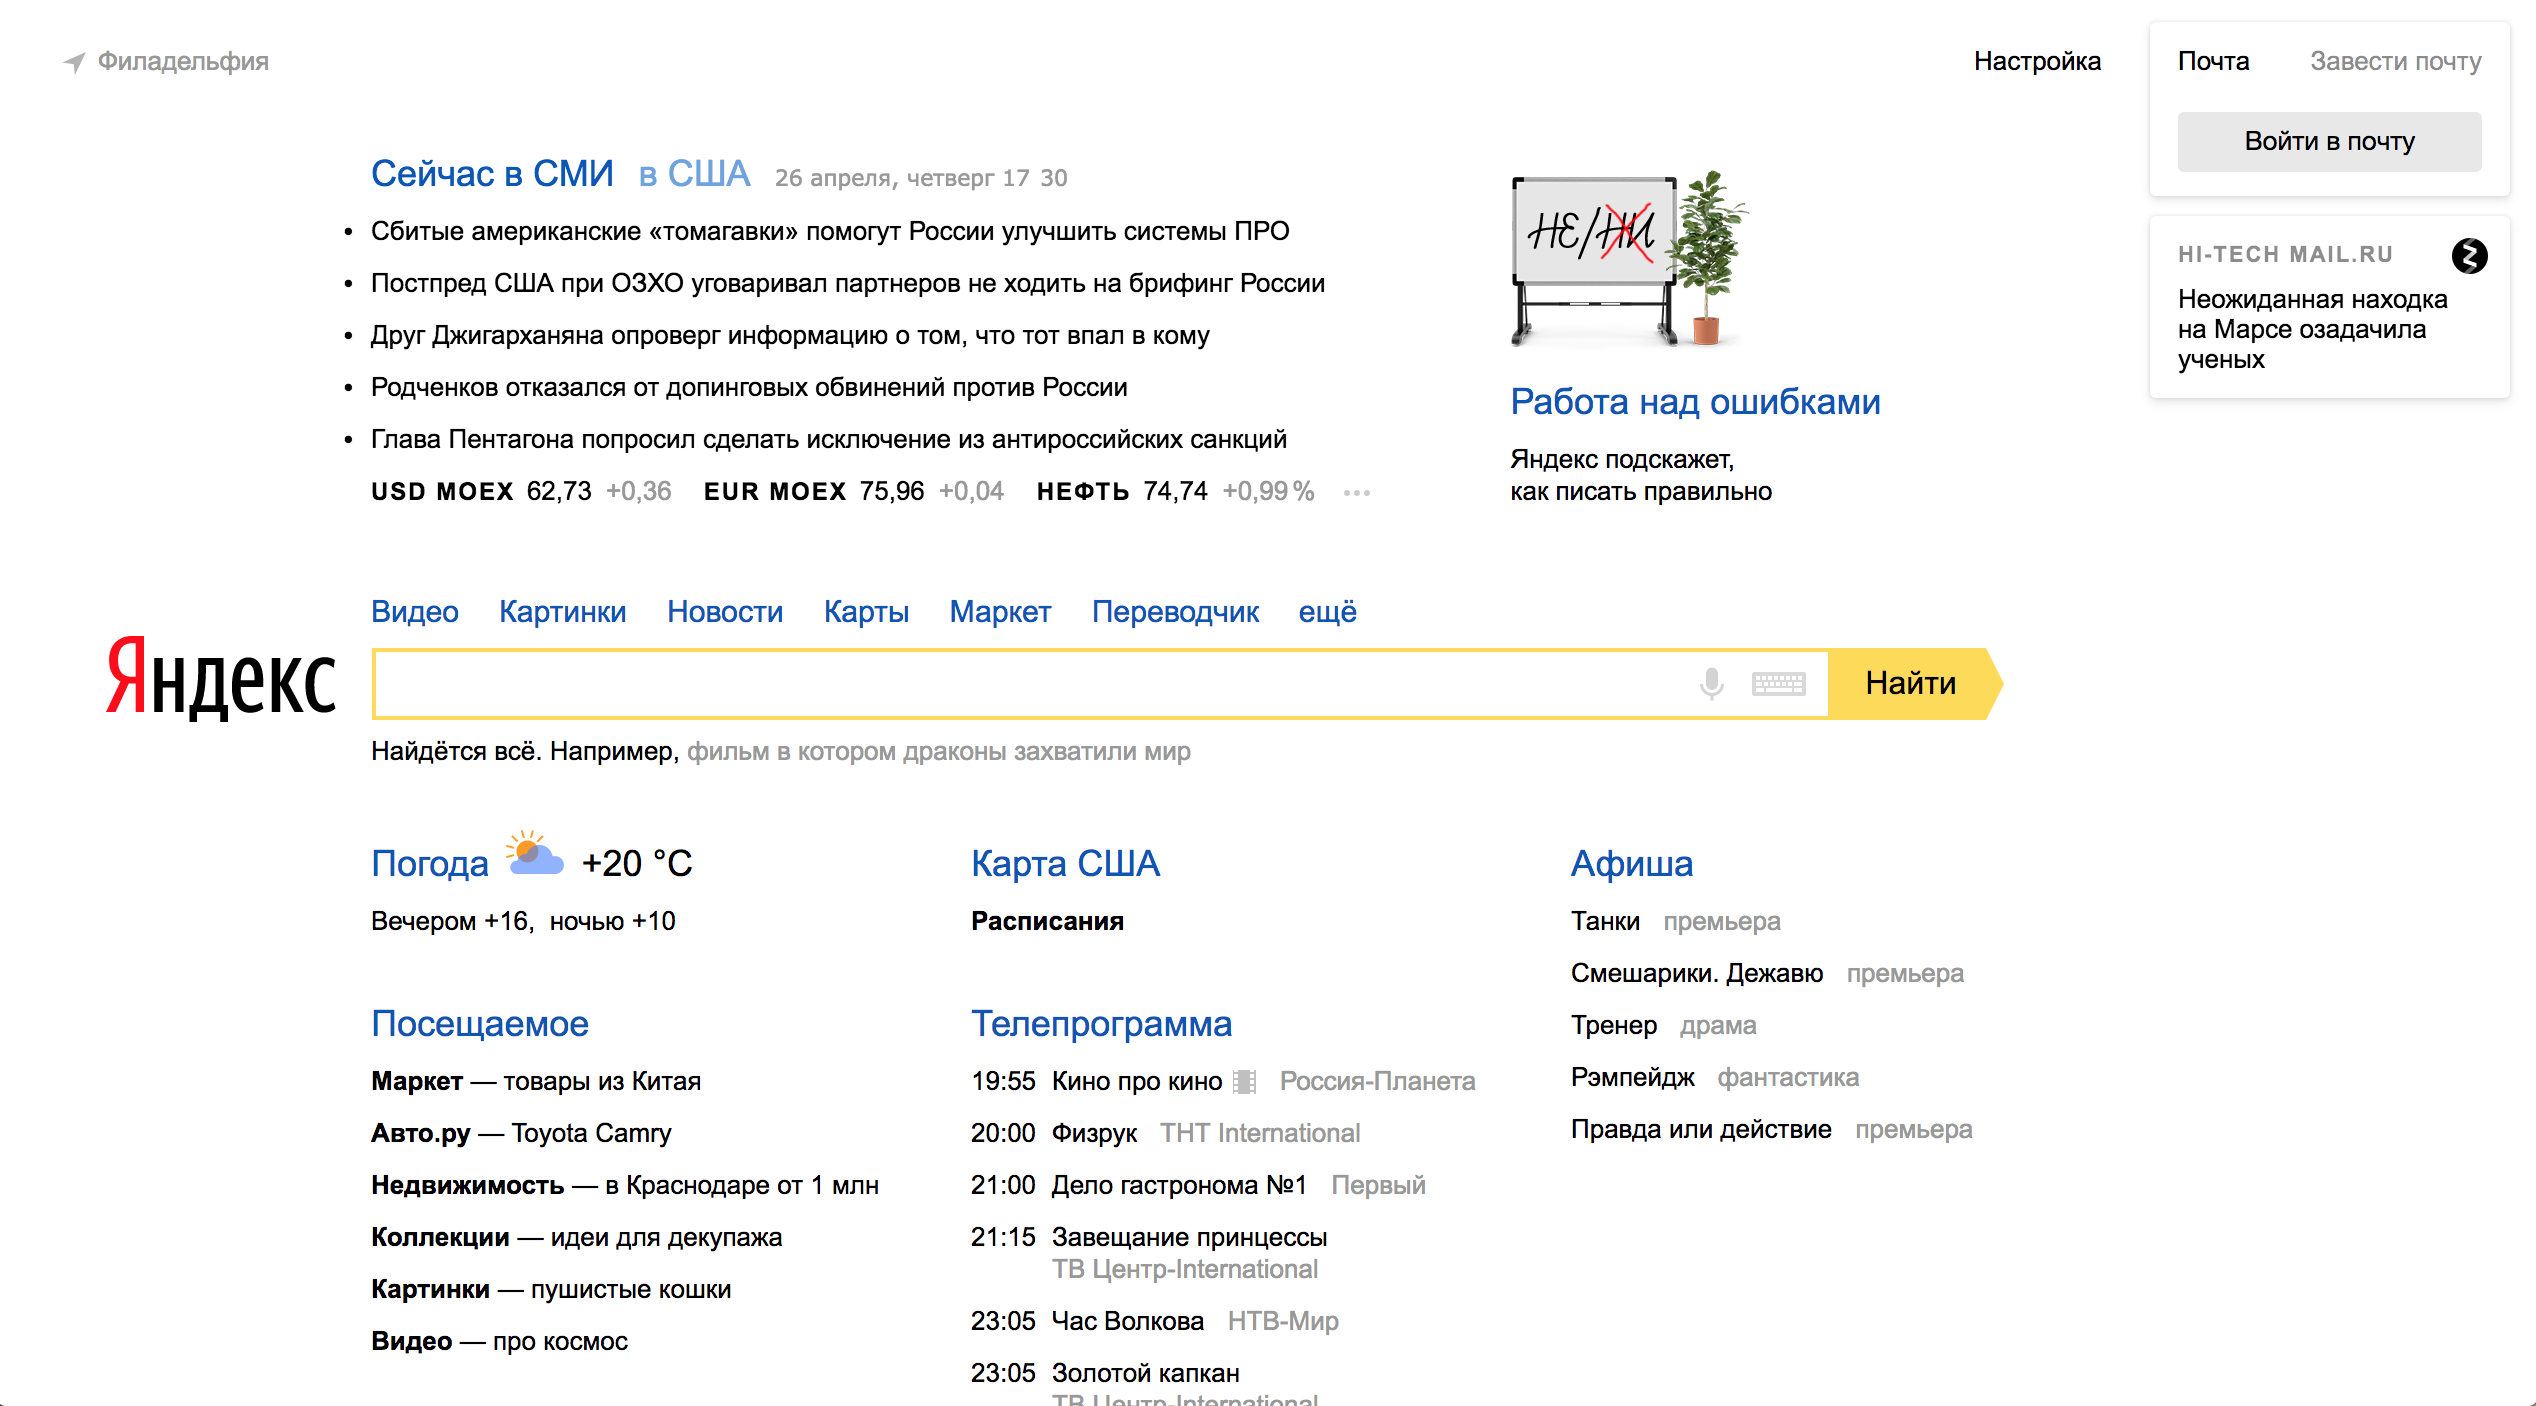 an image of the Yandex Ru search screen